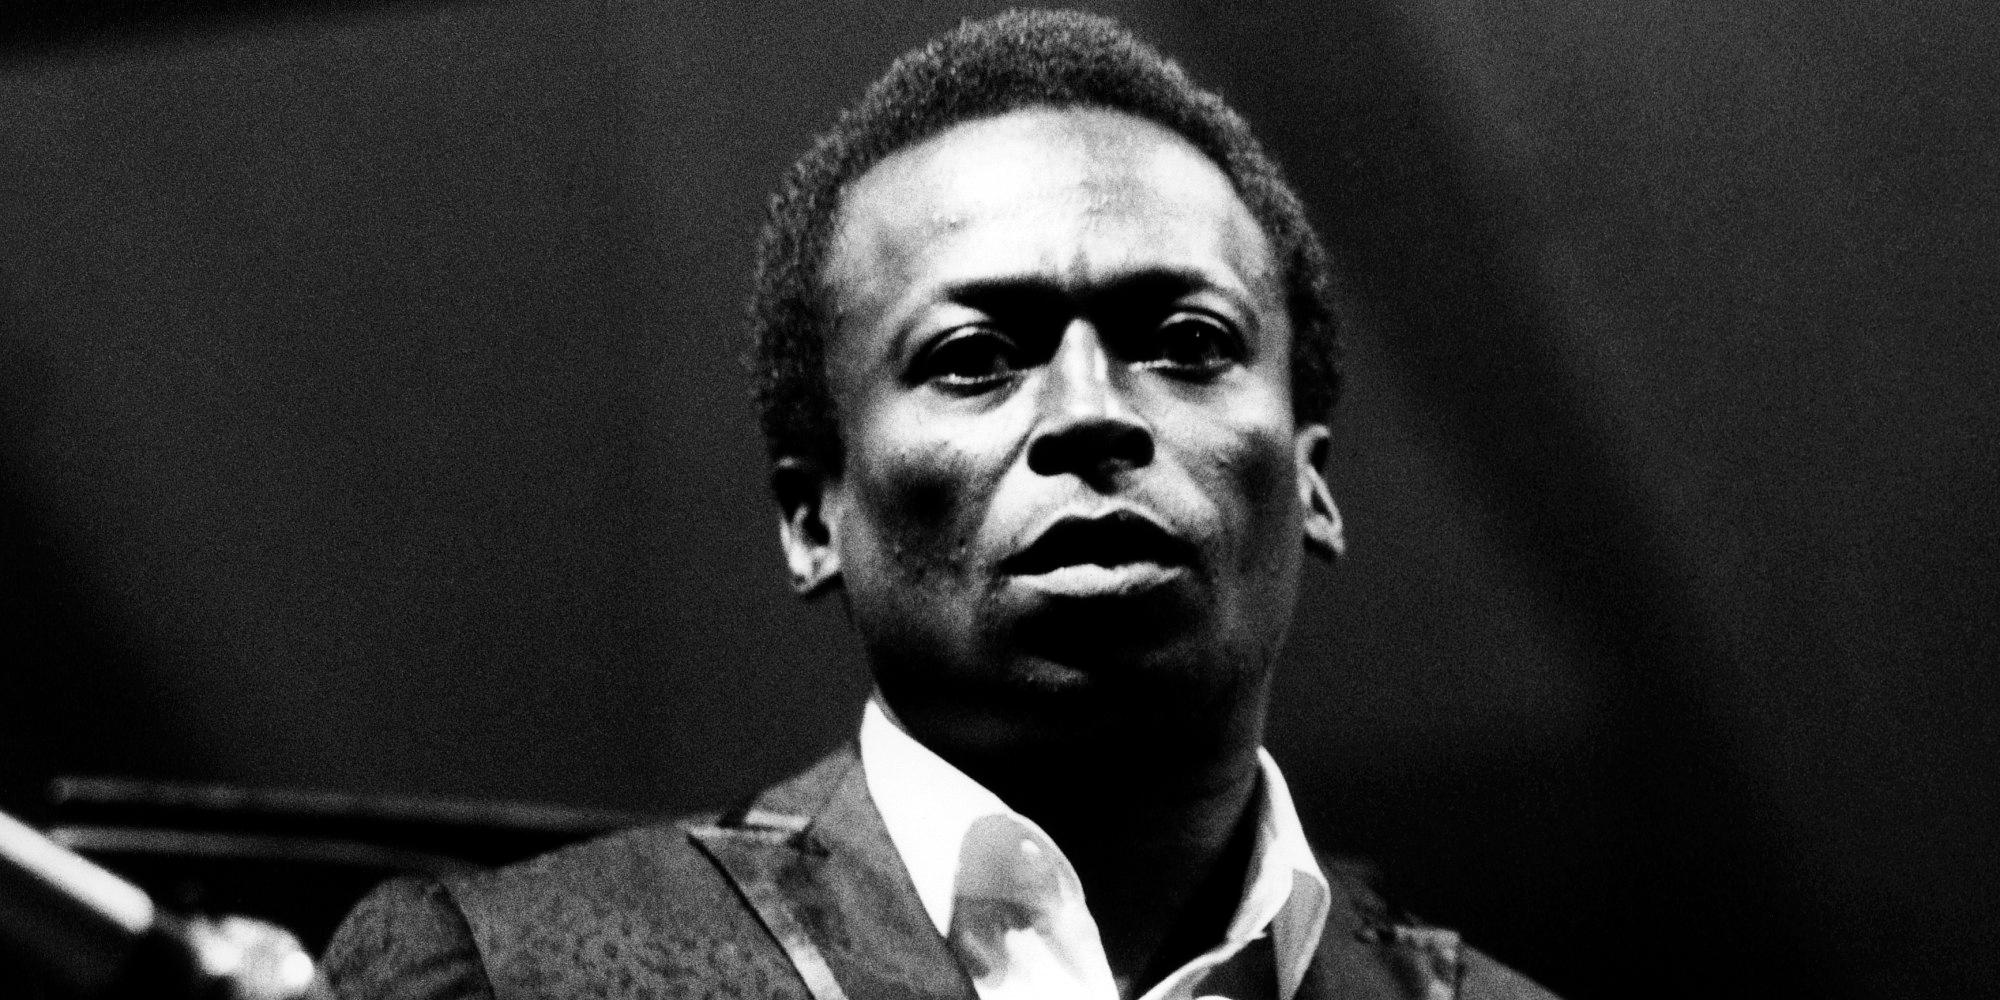 Listening to A Kind of Blue by Miles Davis